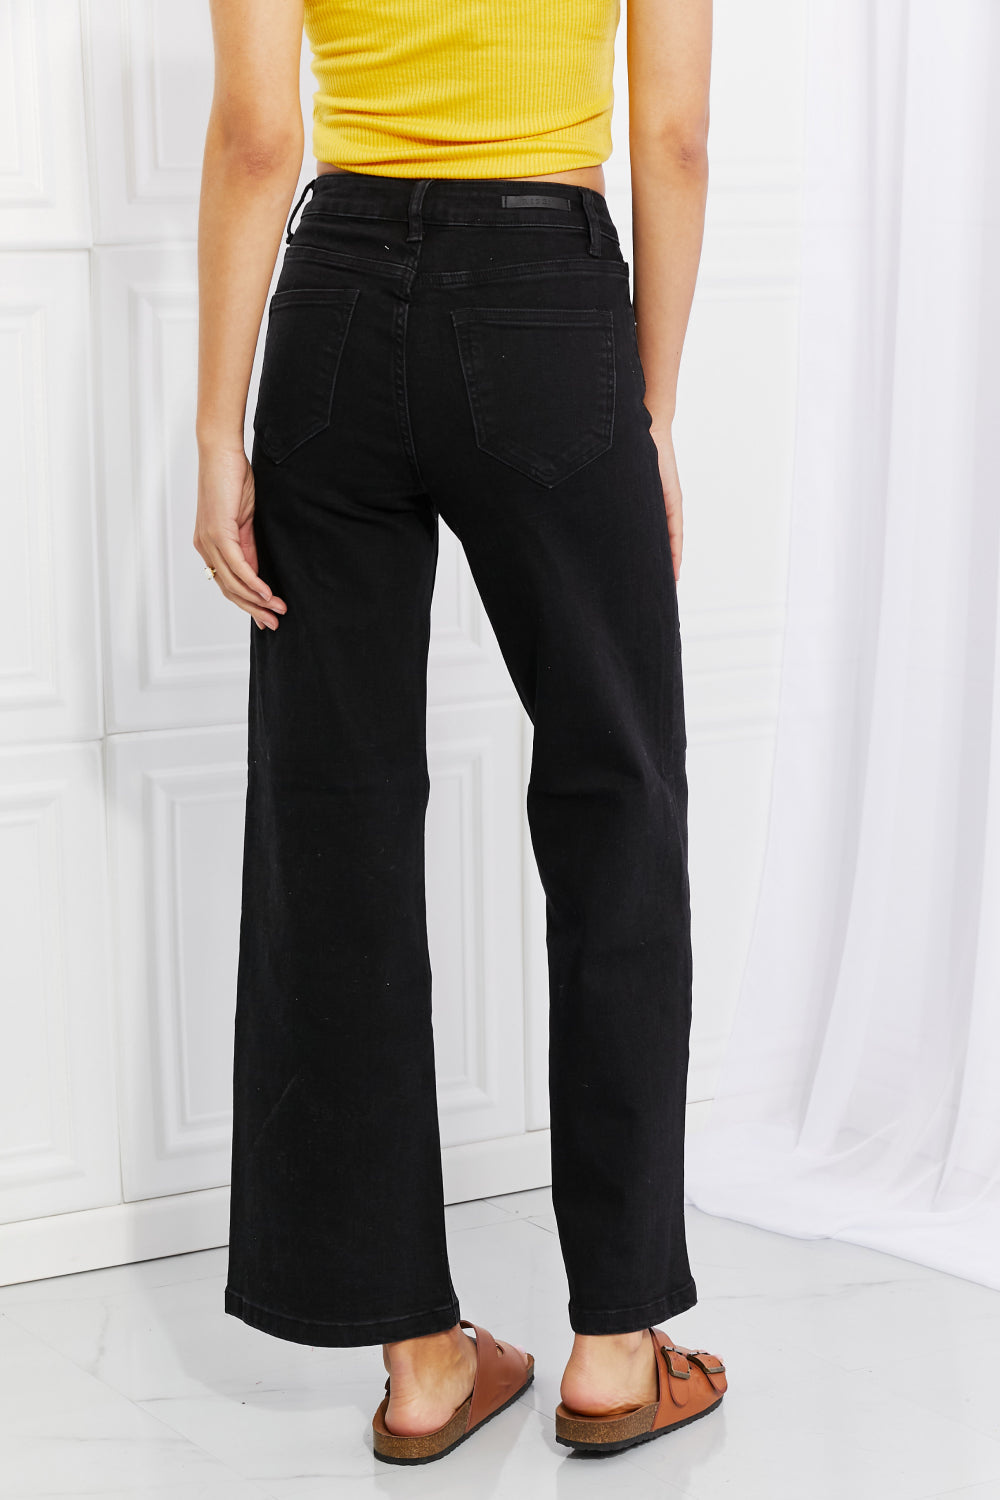 RISEN Amanda Midrise Wide Leg Jeans with Pockets in Black